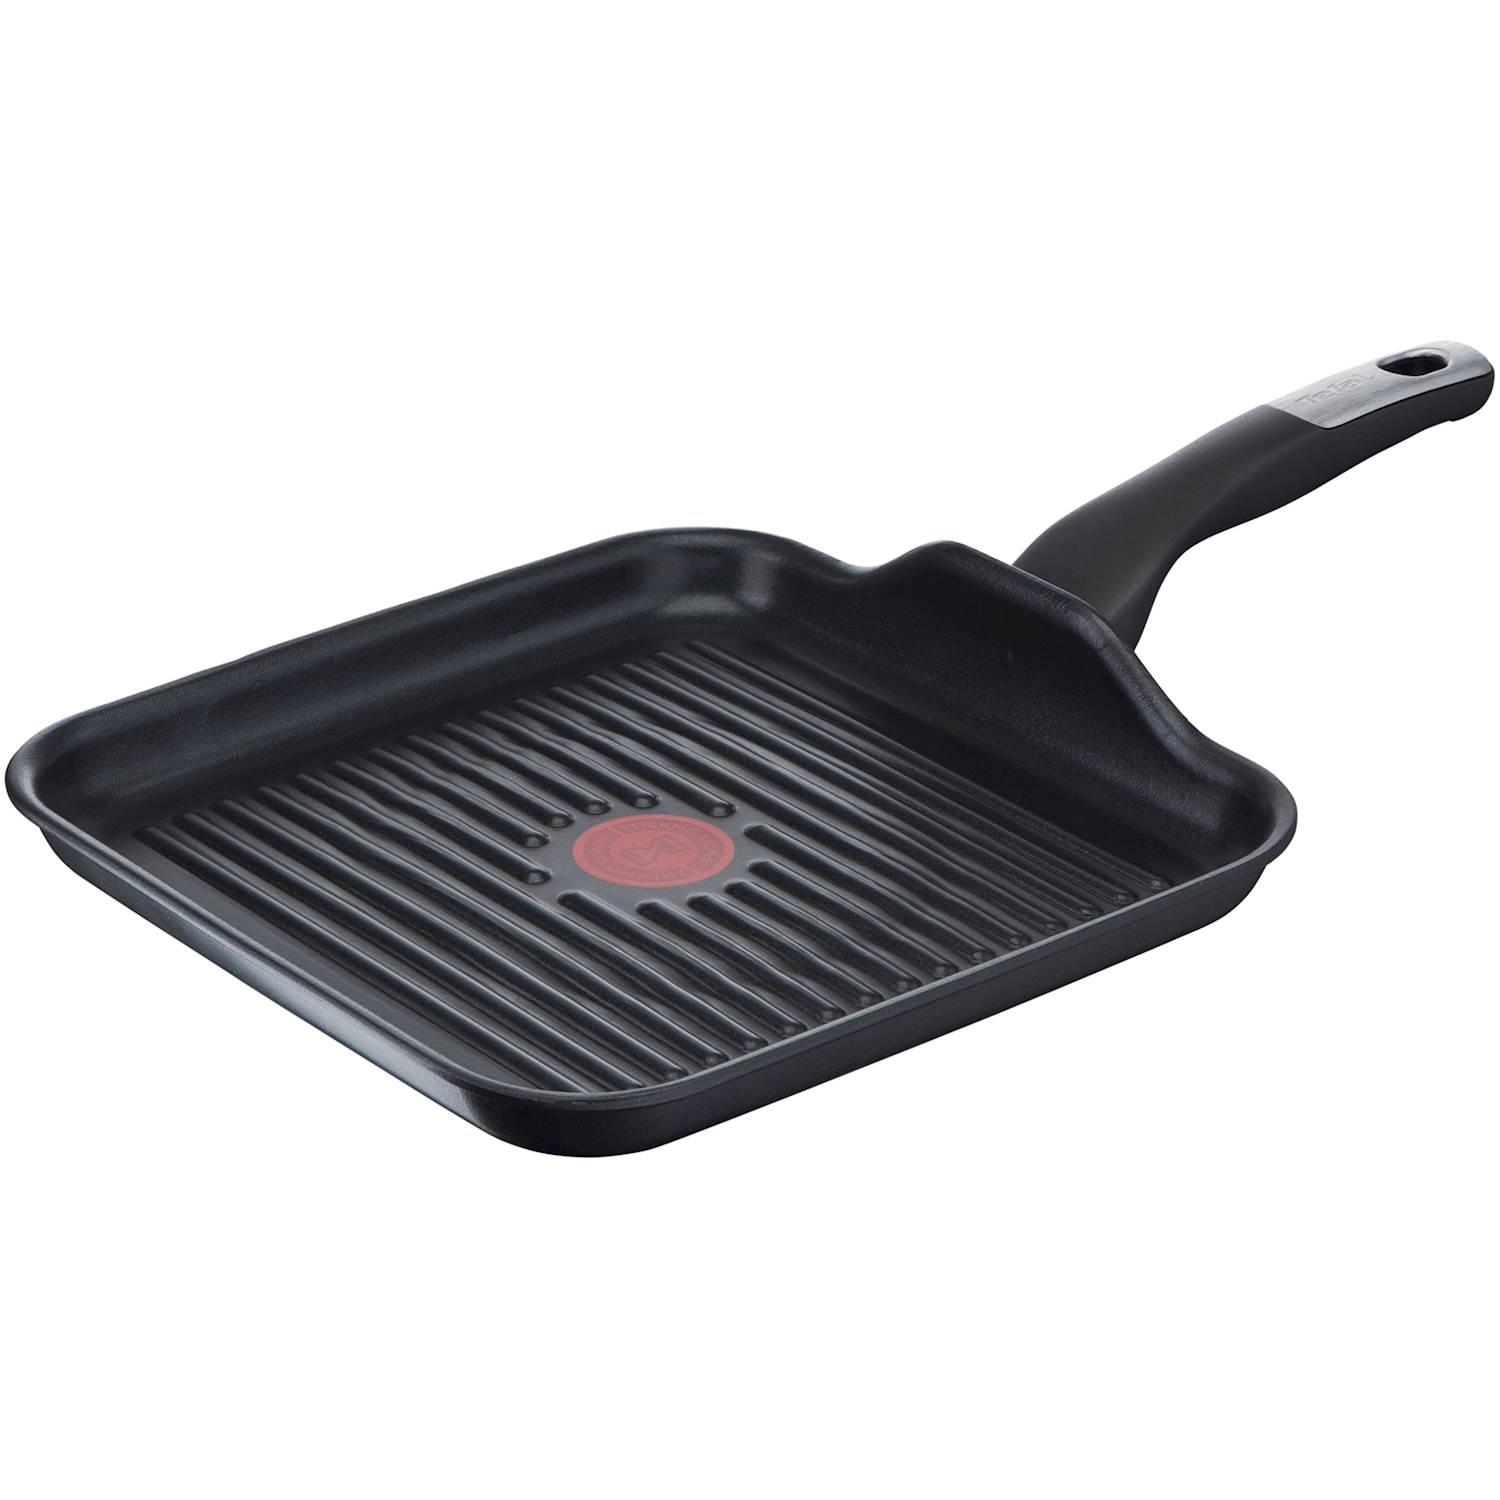 Tefal Unlimited Square Grill Pan 26x